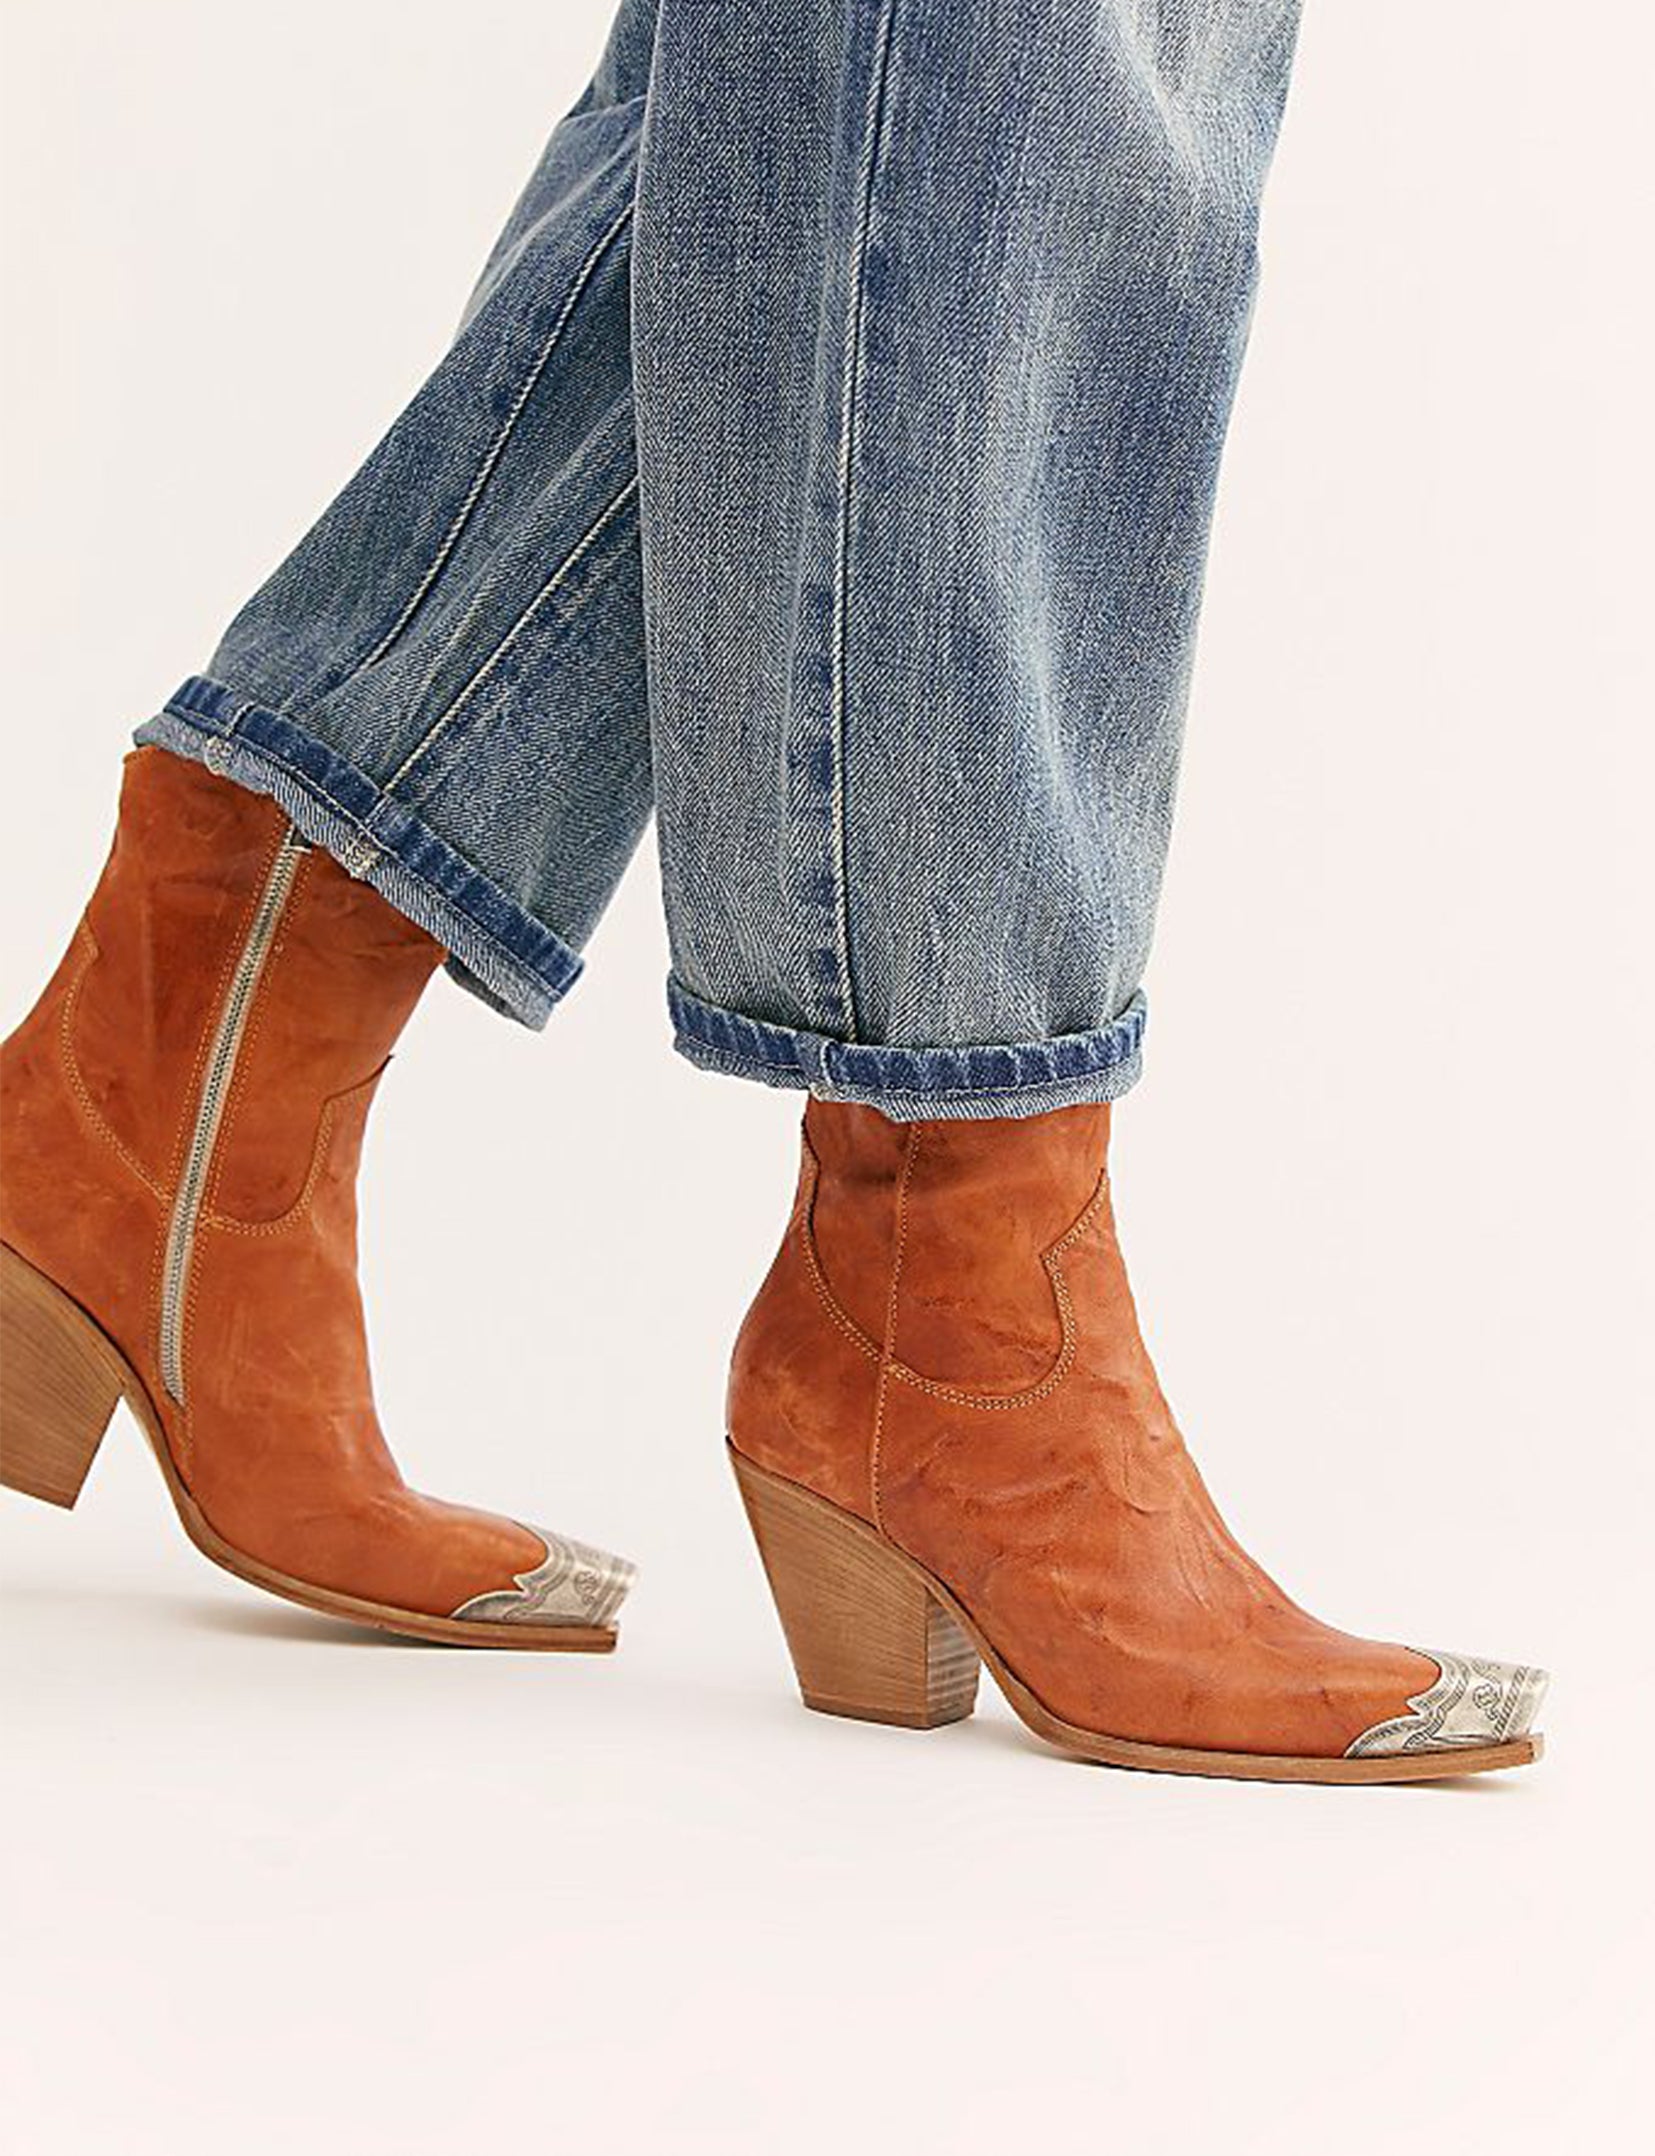 Free People, Shoes, Free People Brayden Woven Tan Western Boots 366